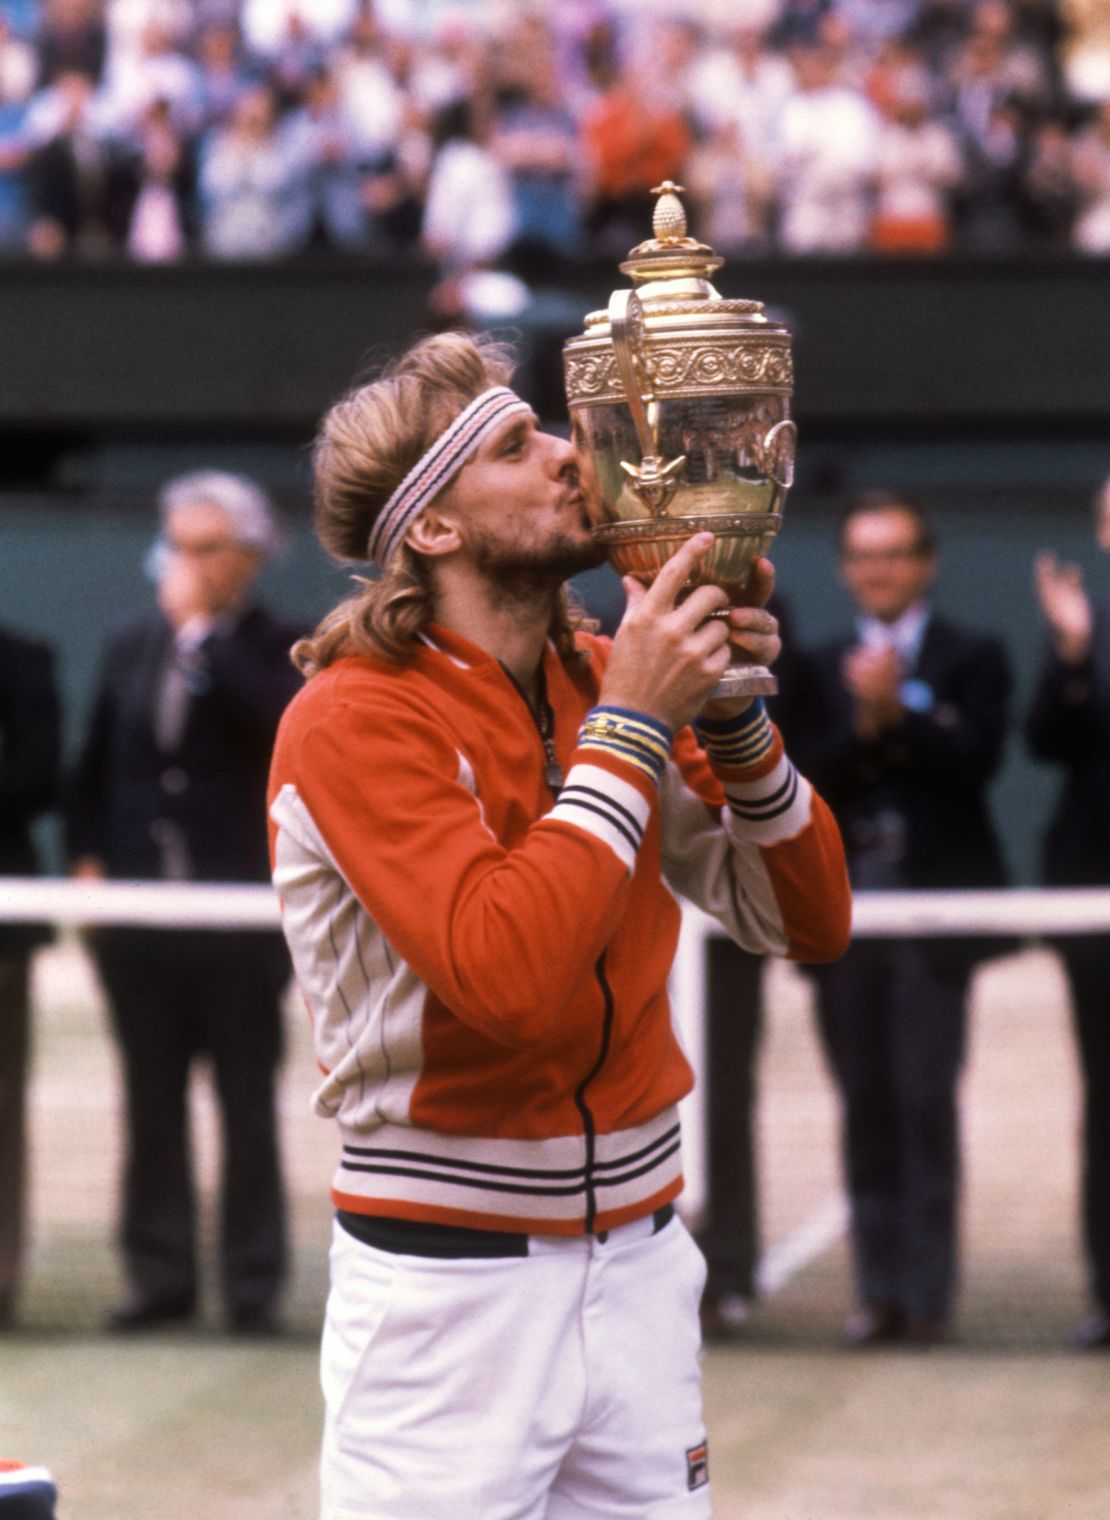 Bjorn Borg with the 1980 Wimbledon trophy.